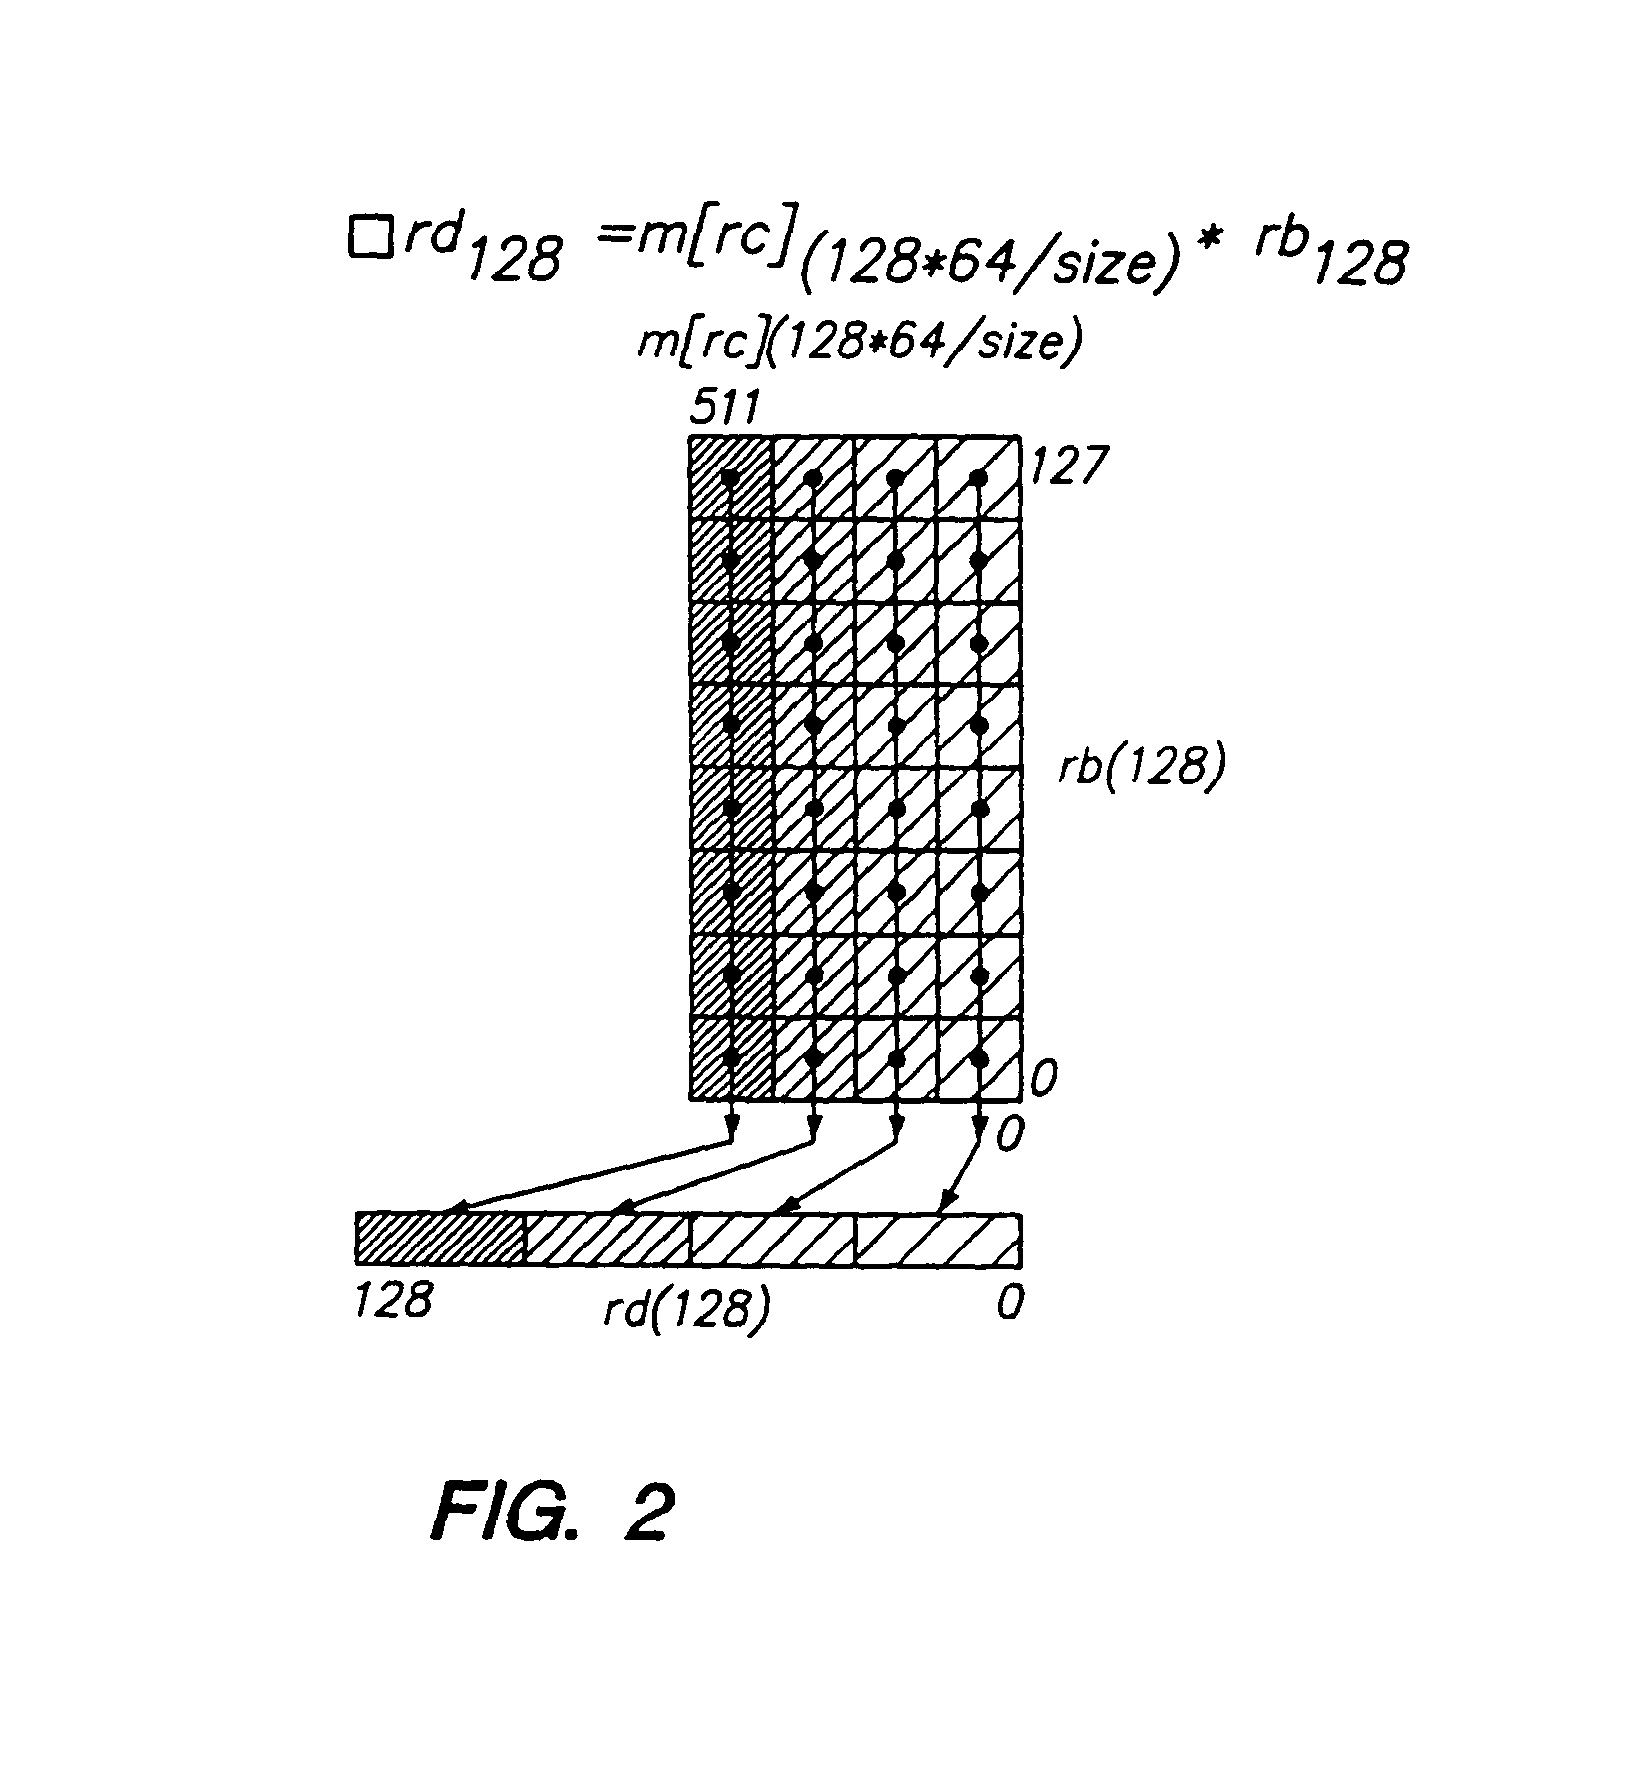 Programmable processor with group floating-point operations